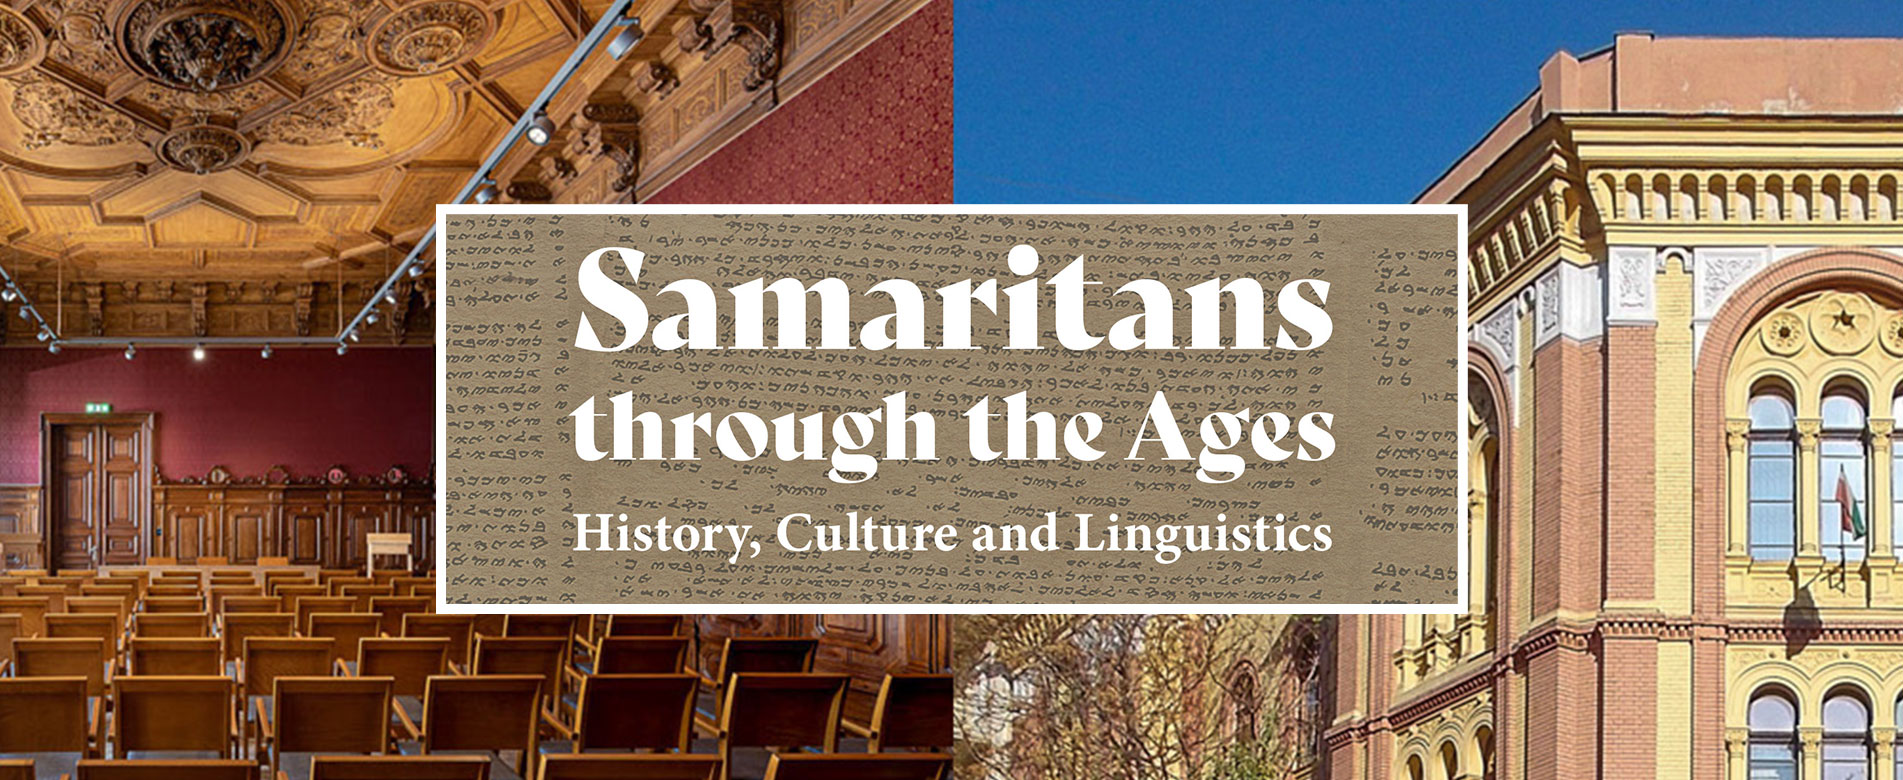  Samaritans through the Ages History, Culture and Linguistics Conference